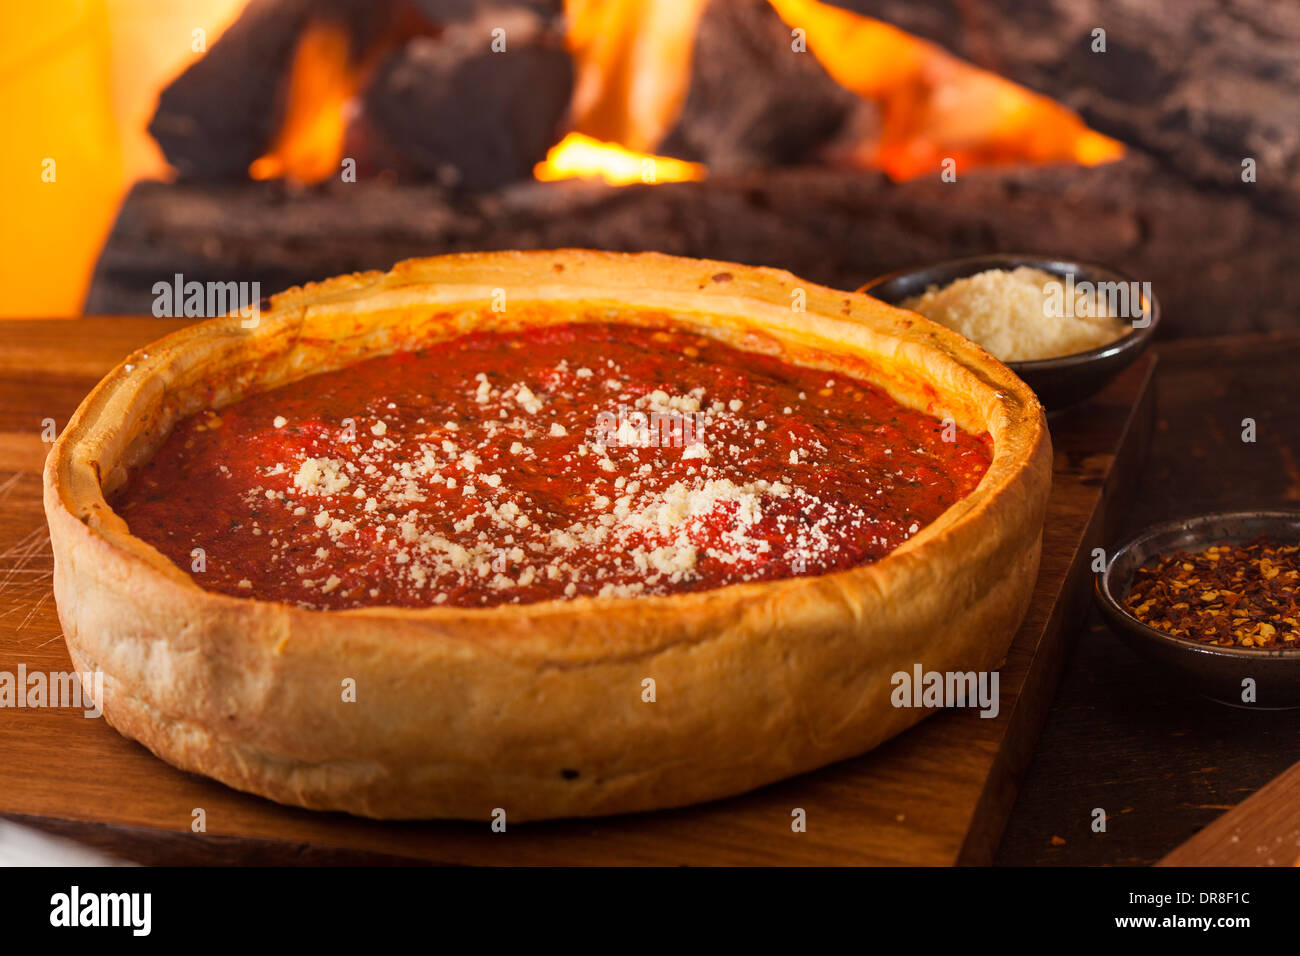 Chicago Style Deep Dish Cheese Pizza with Tomato Sauce Stock Photo